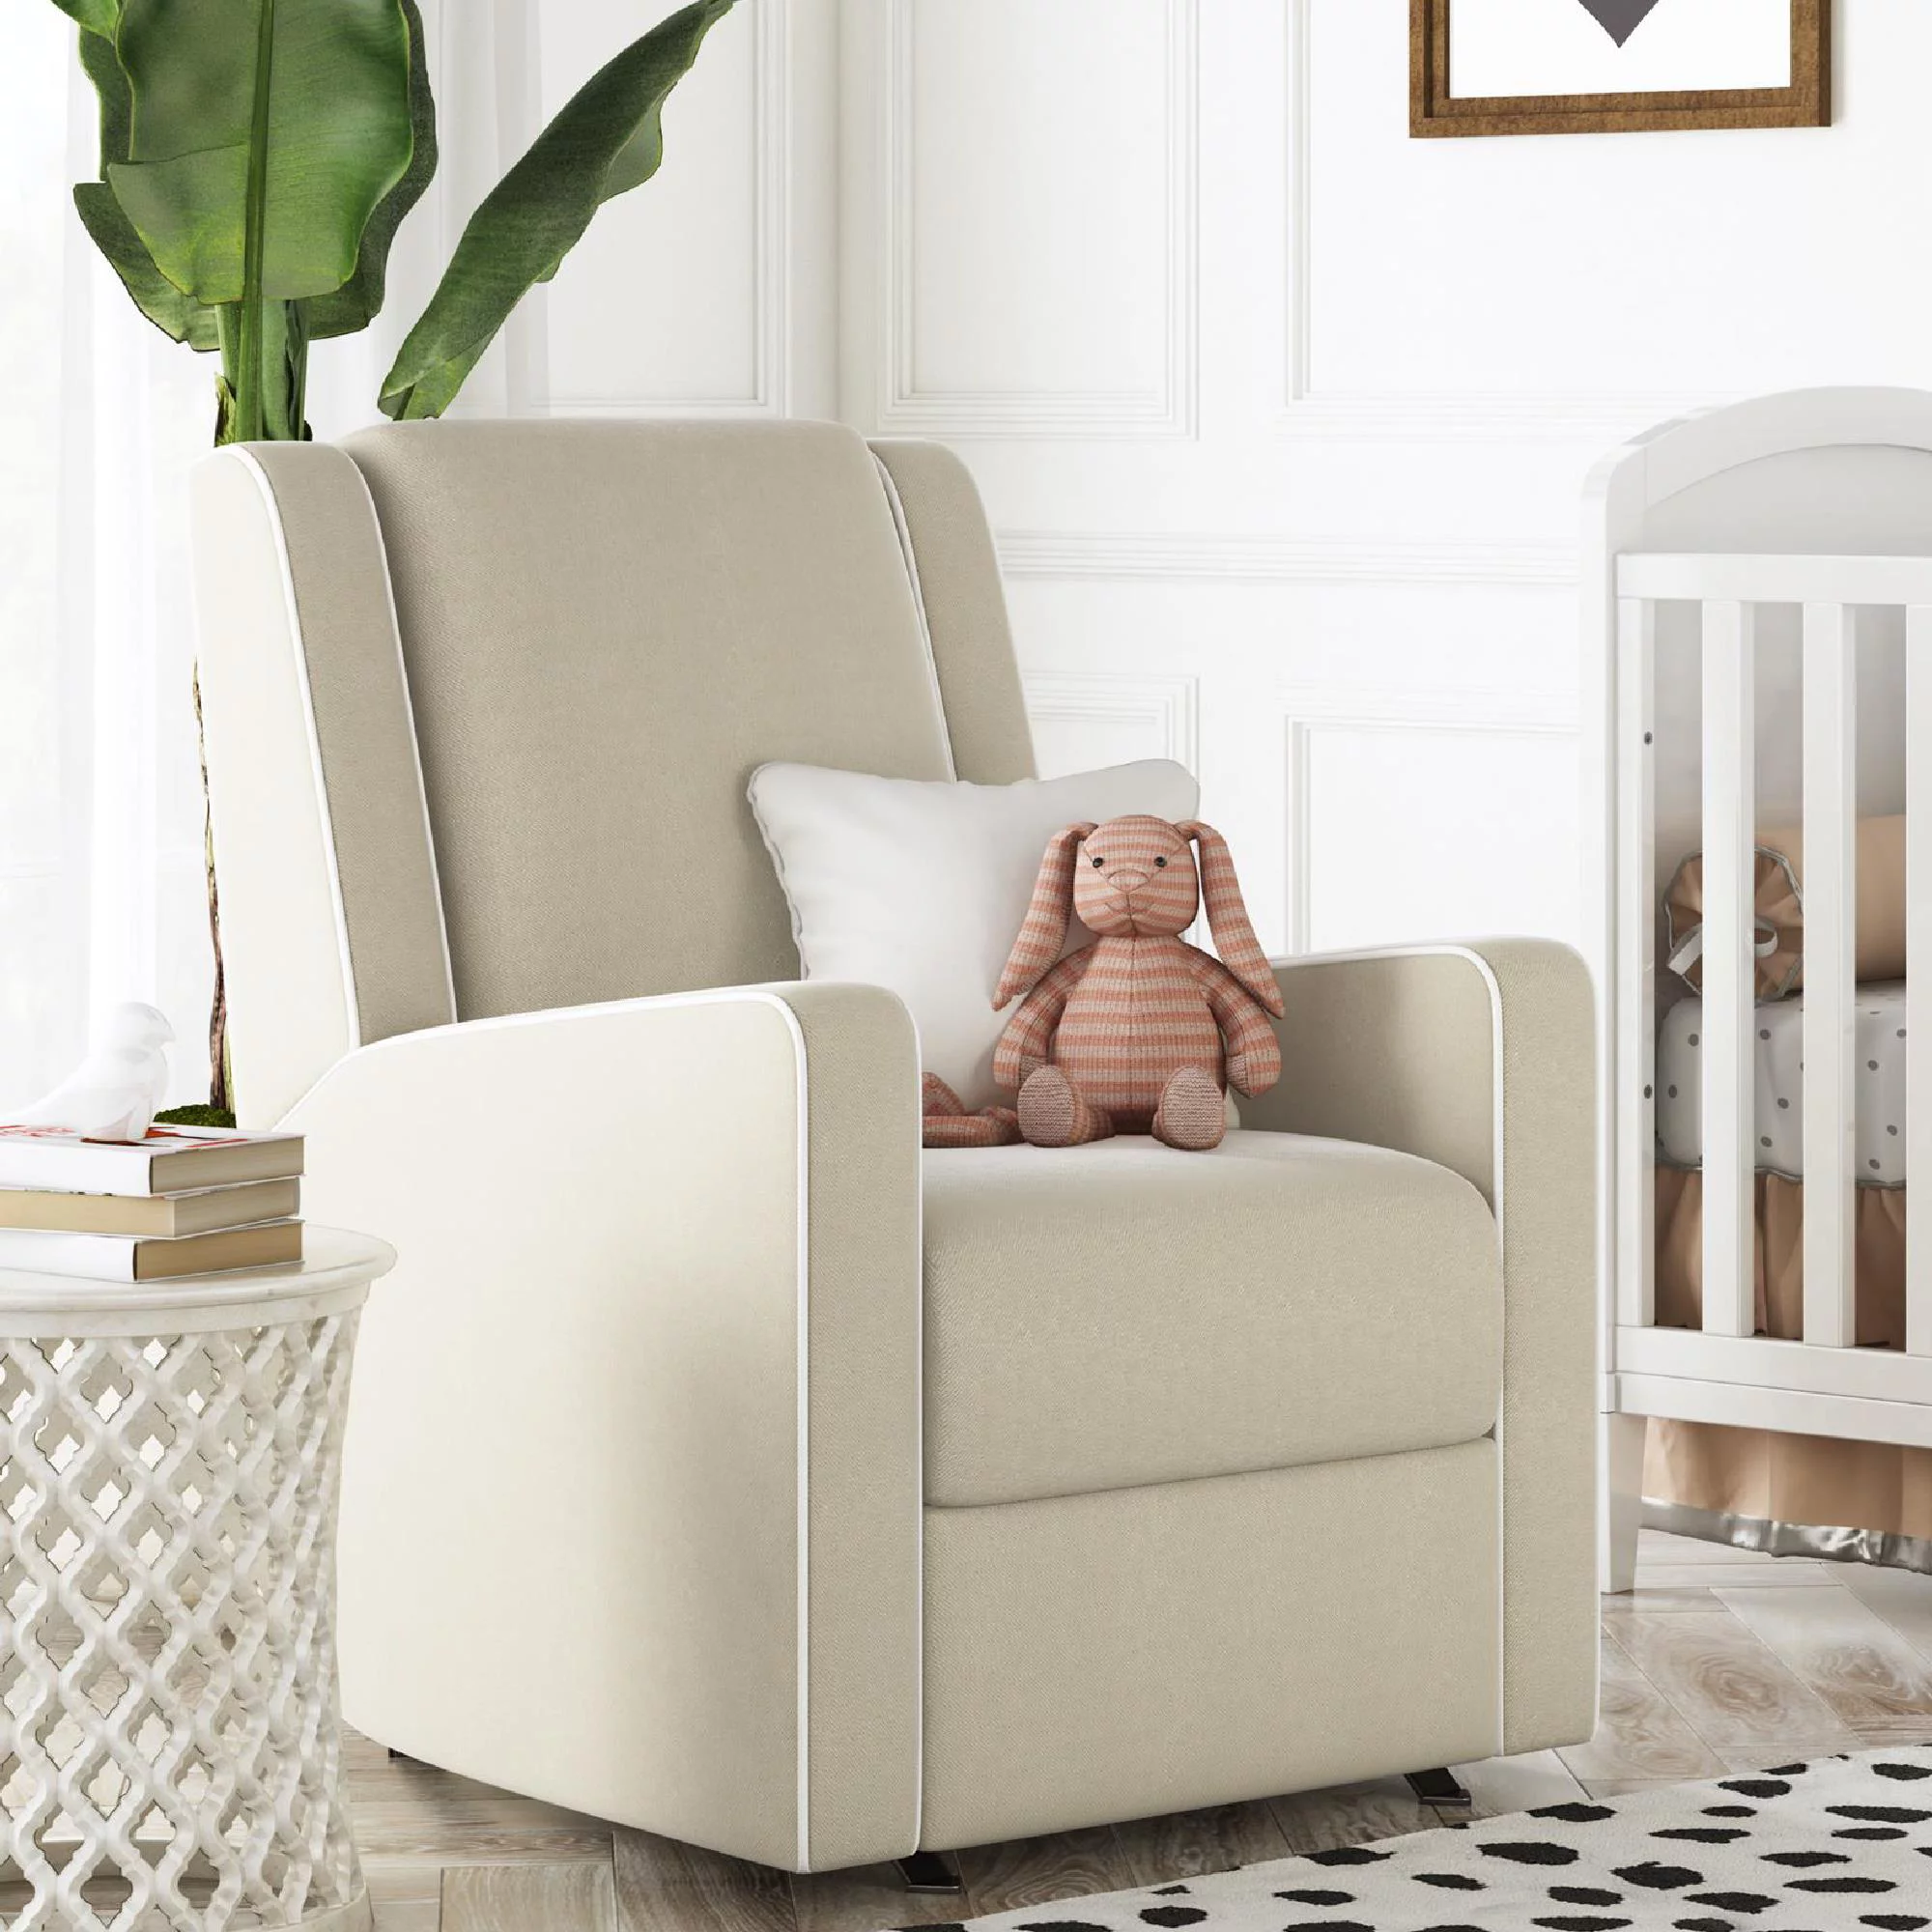 Baby Relax Robyn Rocker Recliner Chair with Pocket Coil Seating, Beige Linen